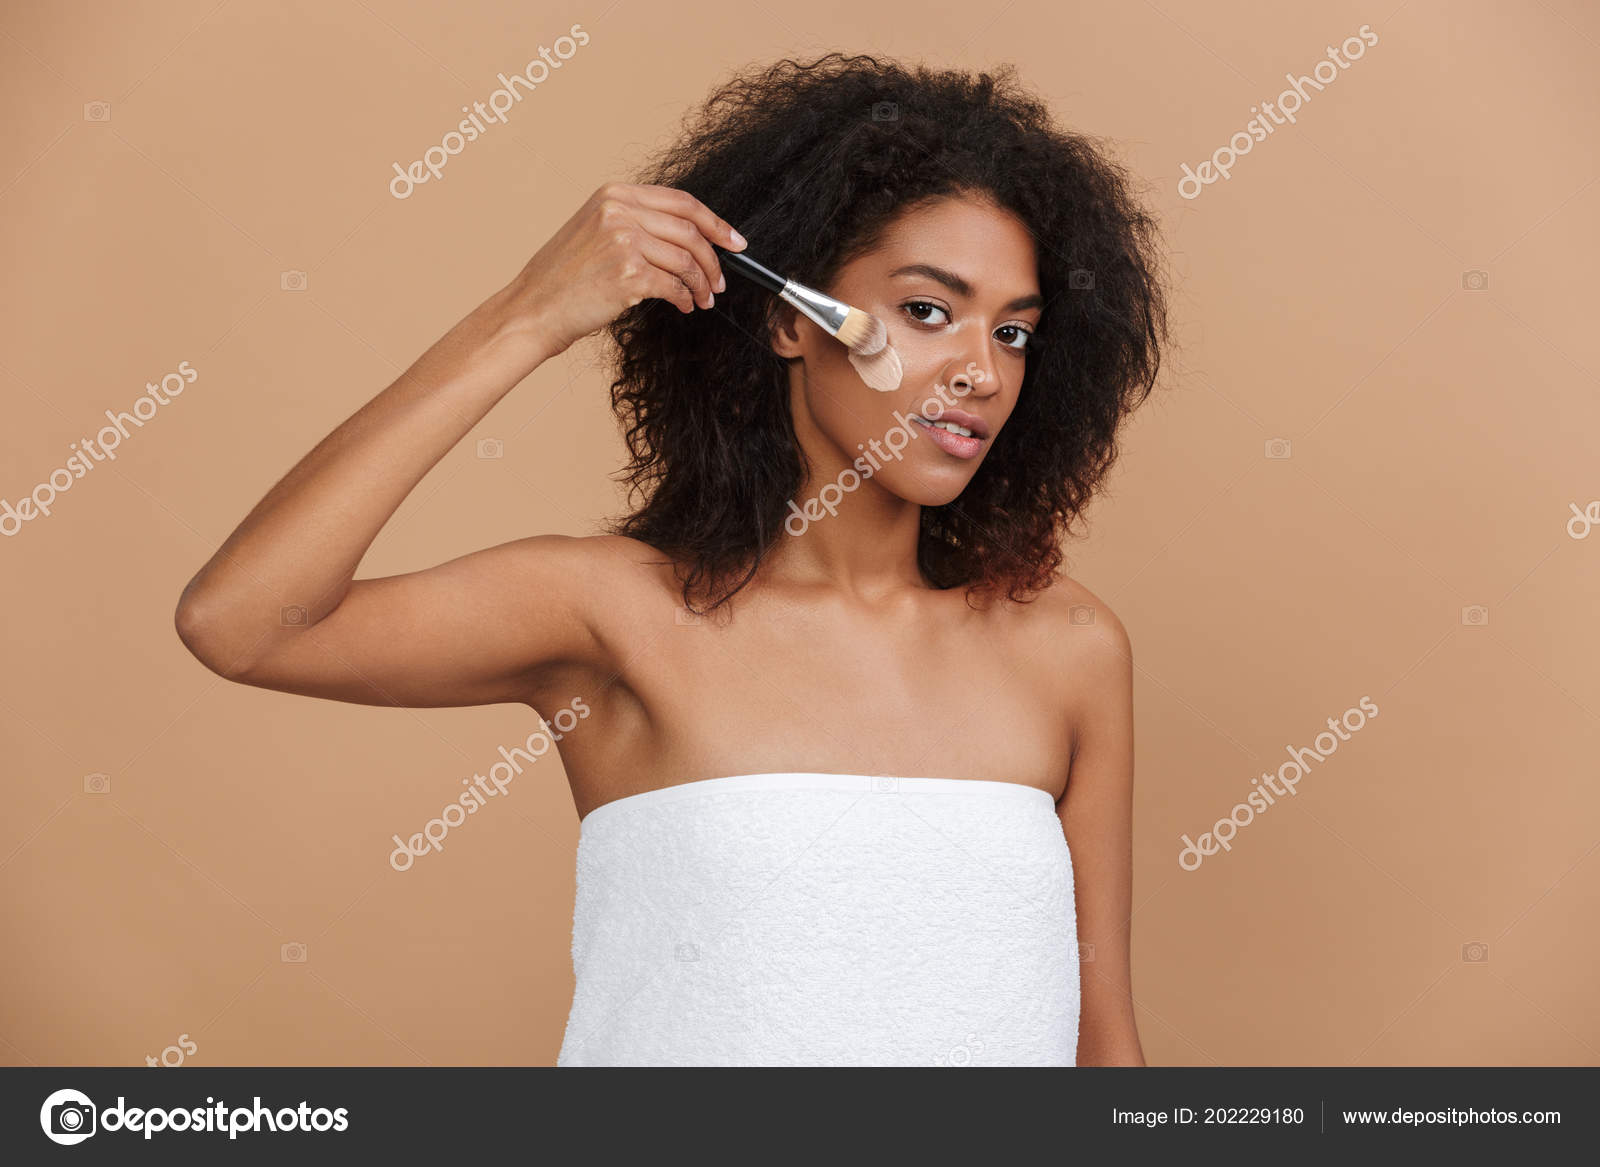 Smiling Pretty Naked Woman Wearing Towel Using Cosmetica Brush Looking